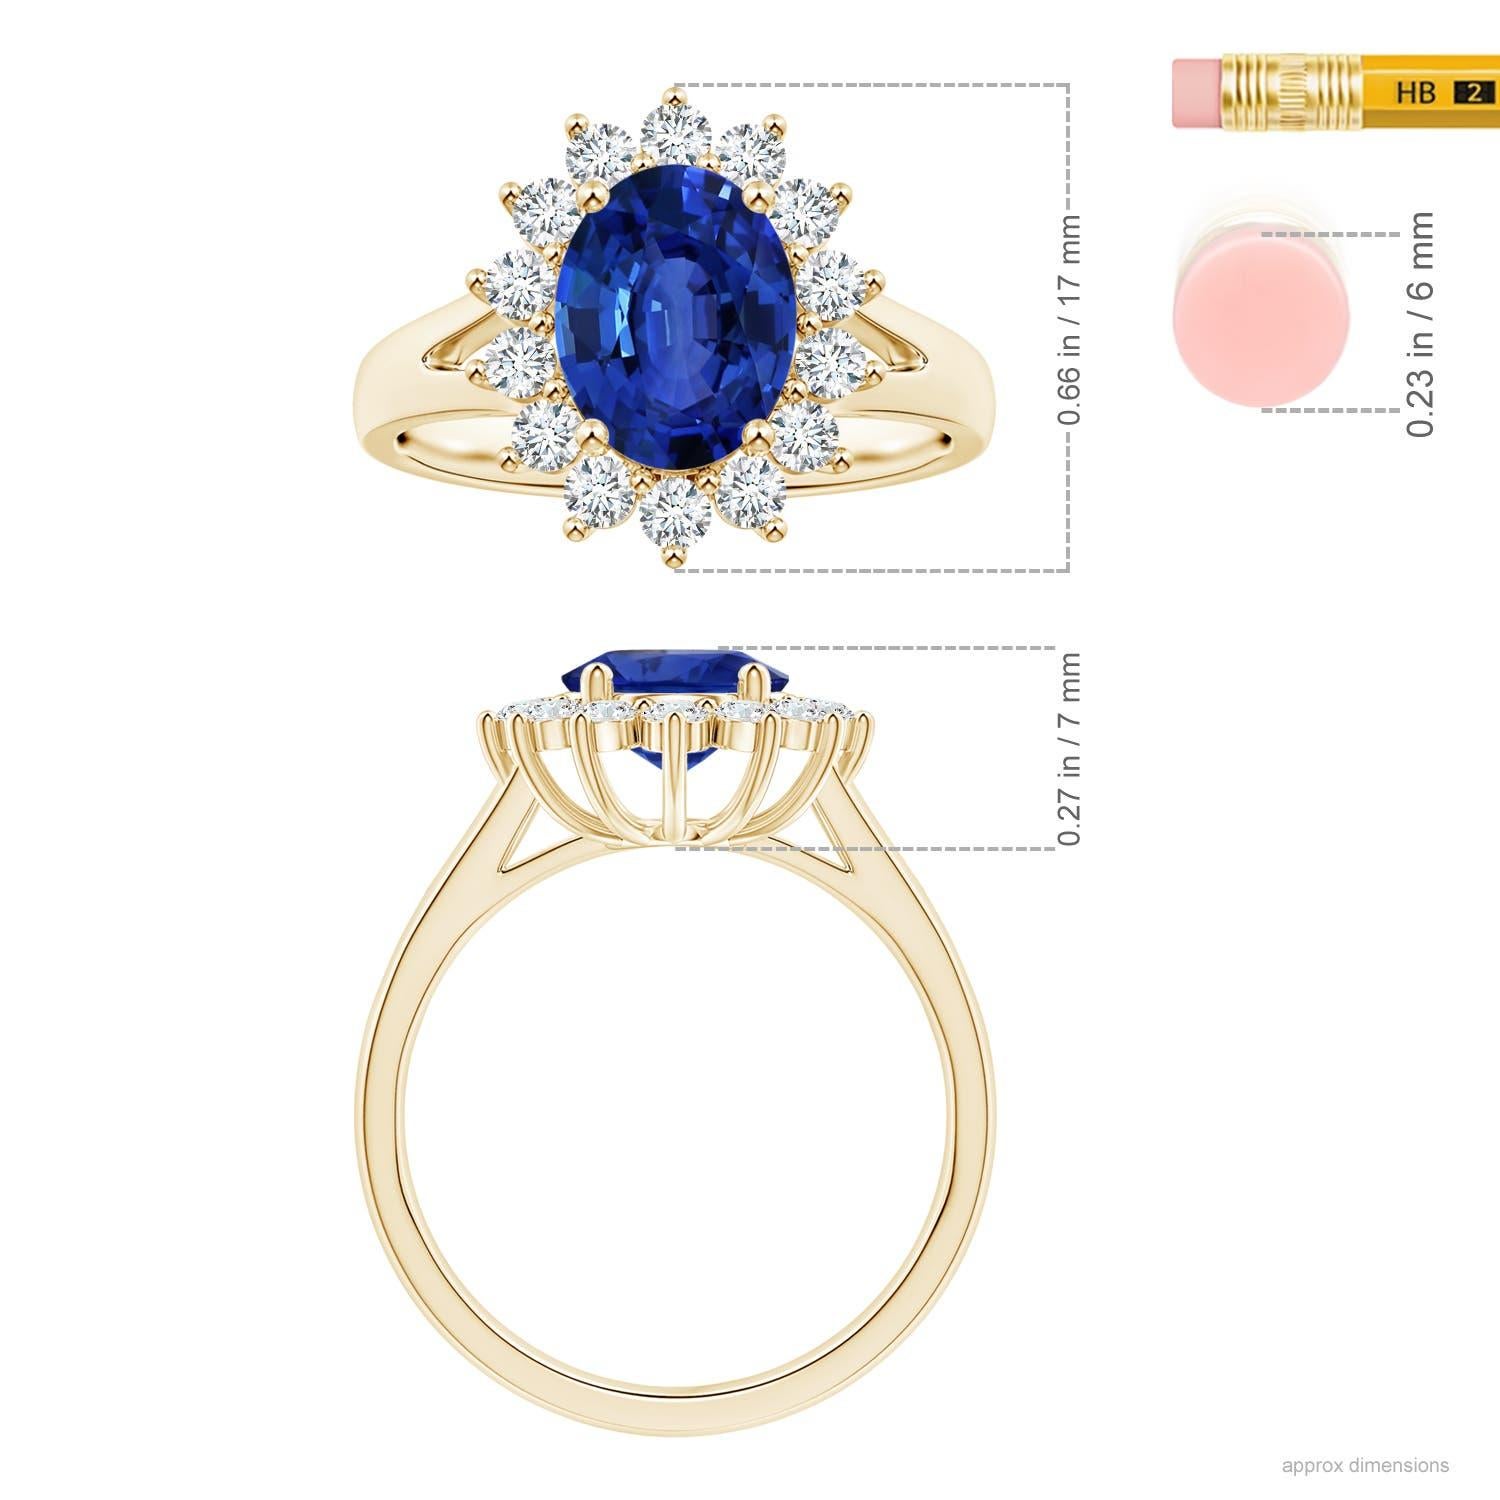 ANGARA Princess Diana Inspired GIA Certified Sapphire Halo Ring in Yellow Gold  4